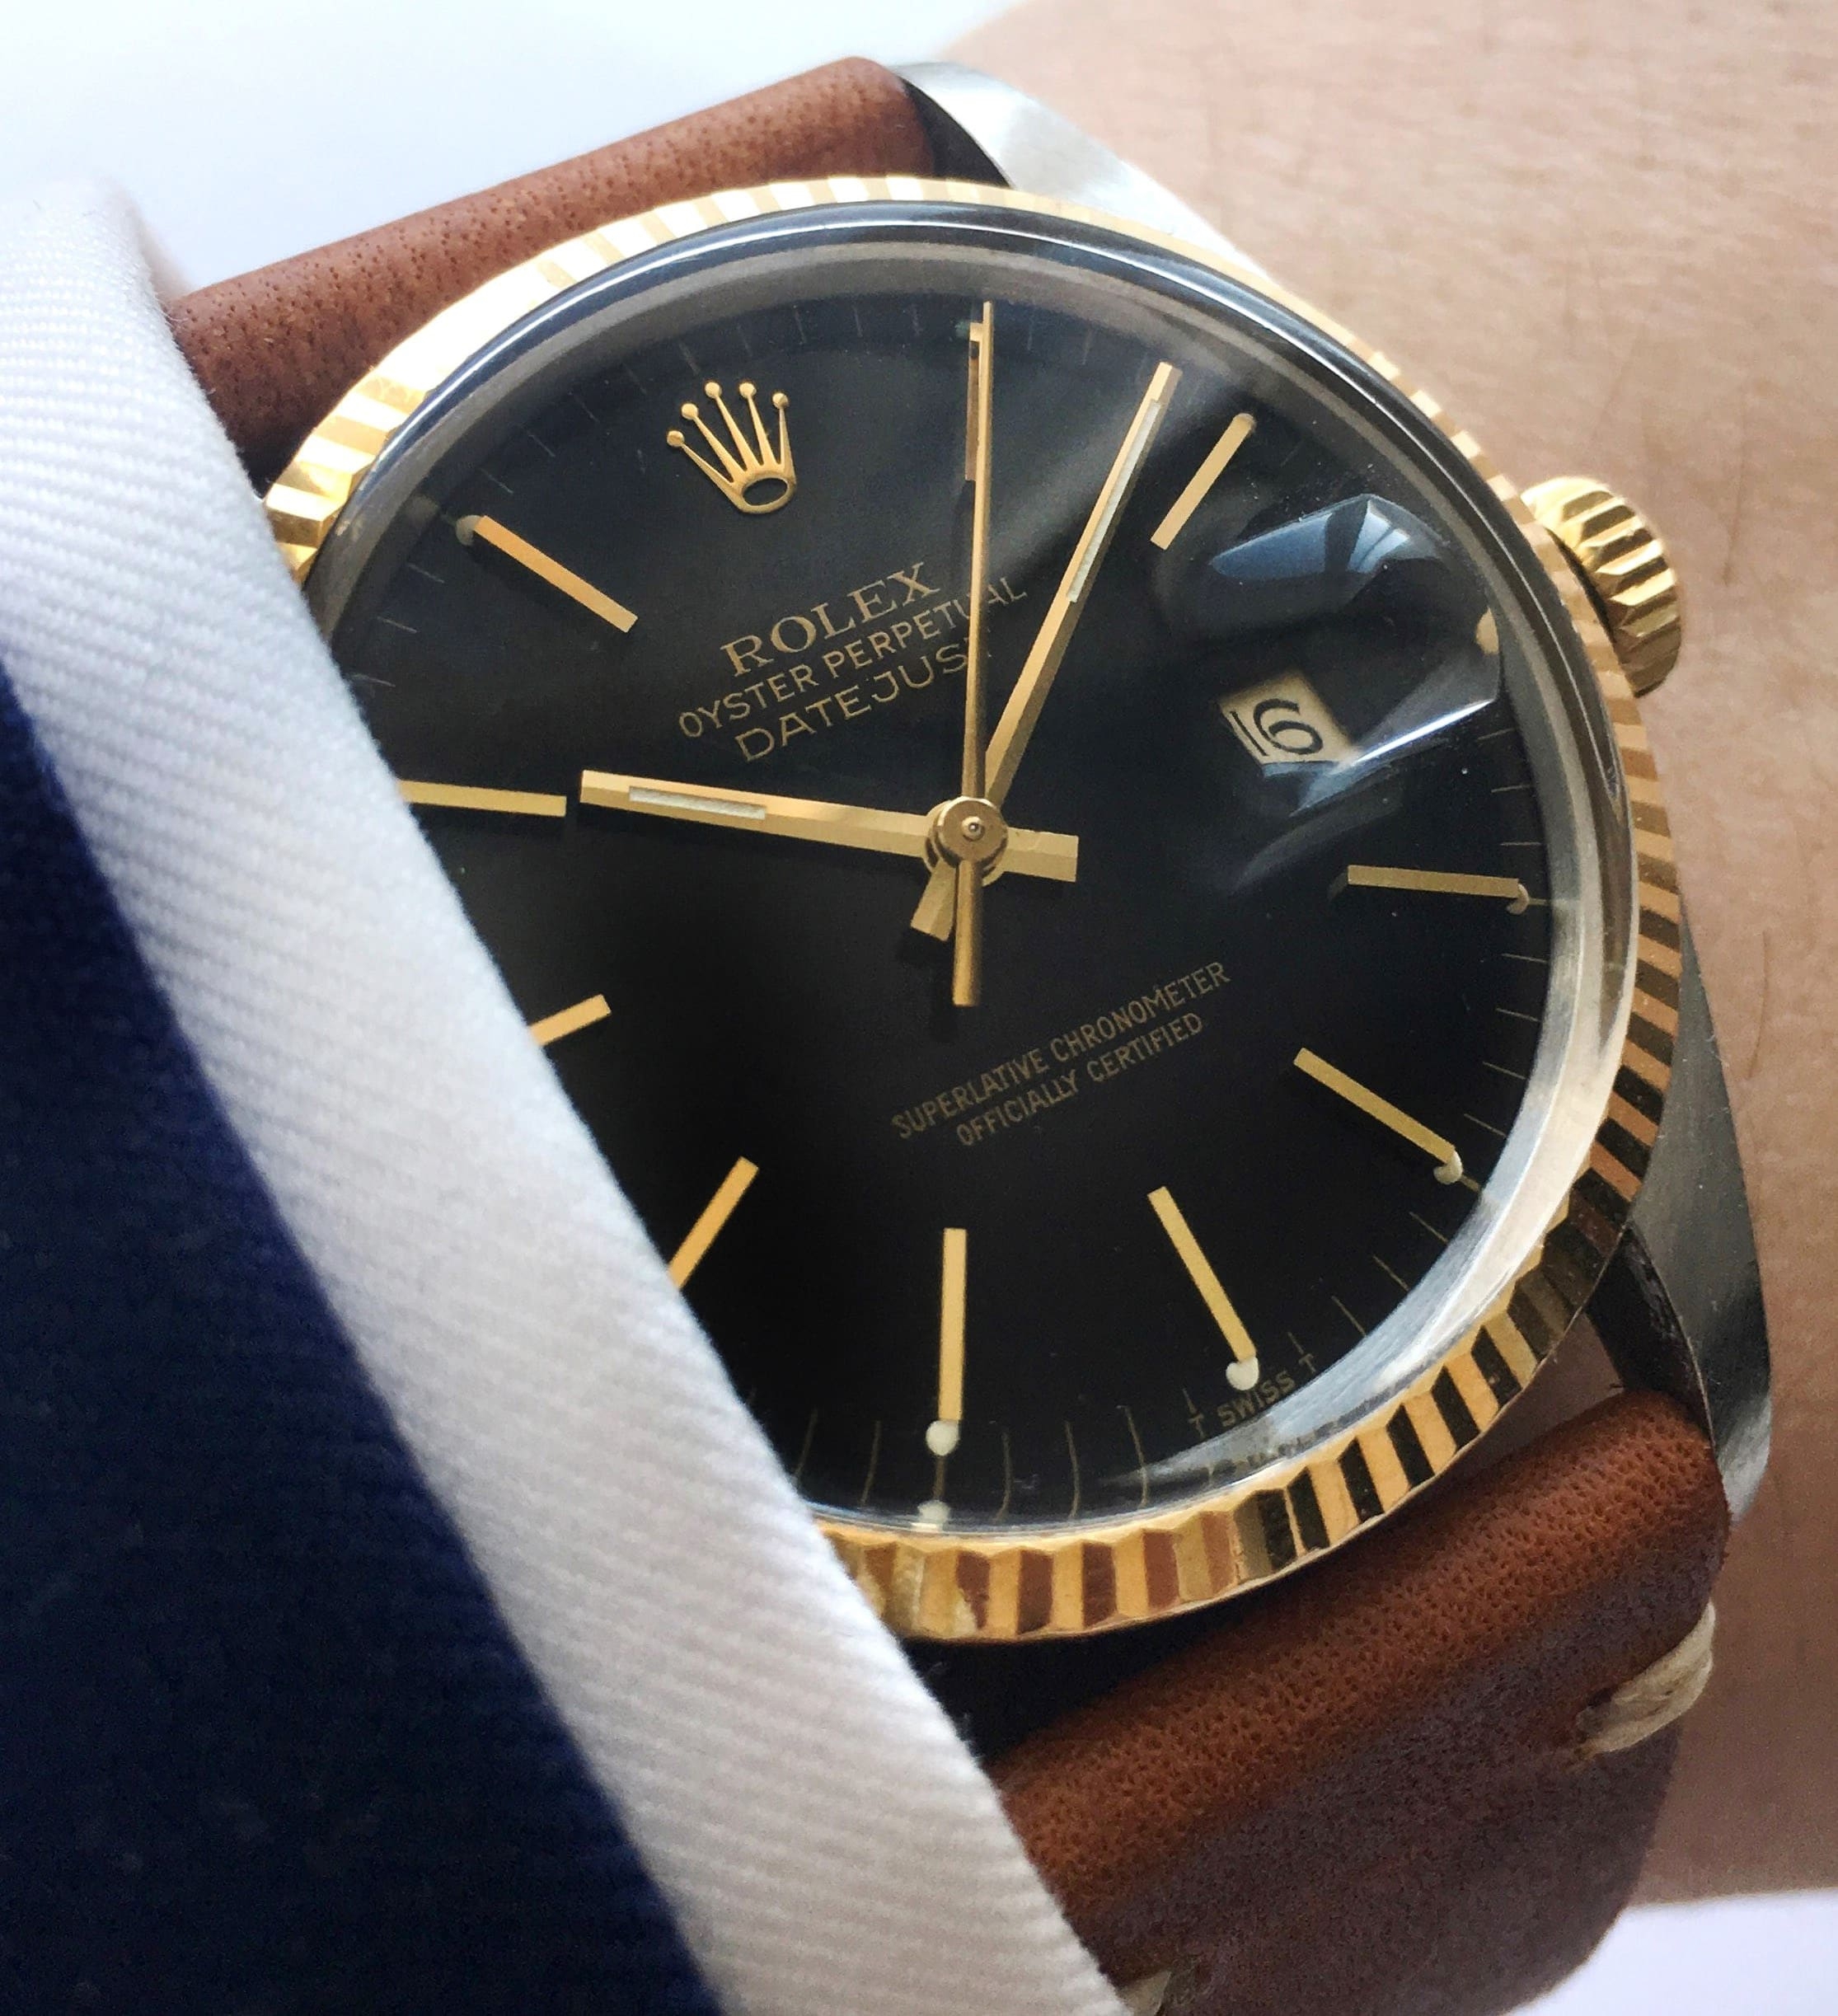 Rolex Datejust 16013 with black dial 